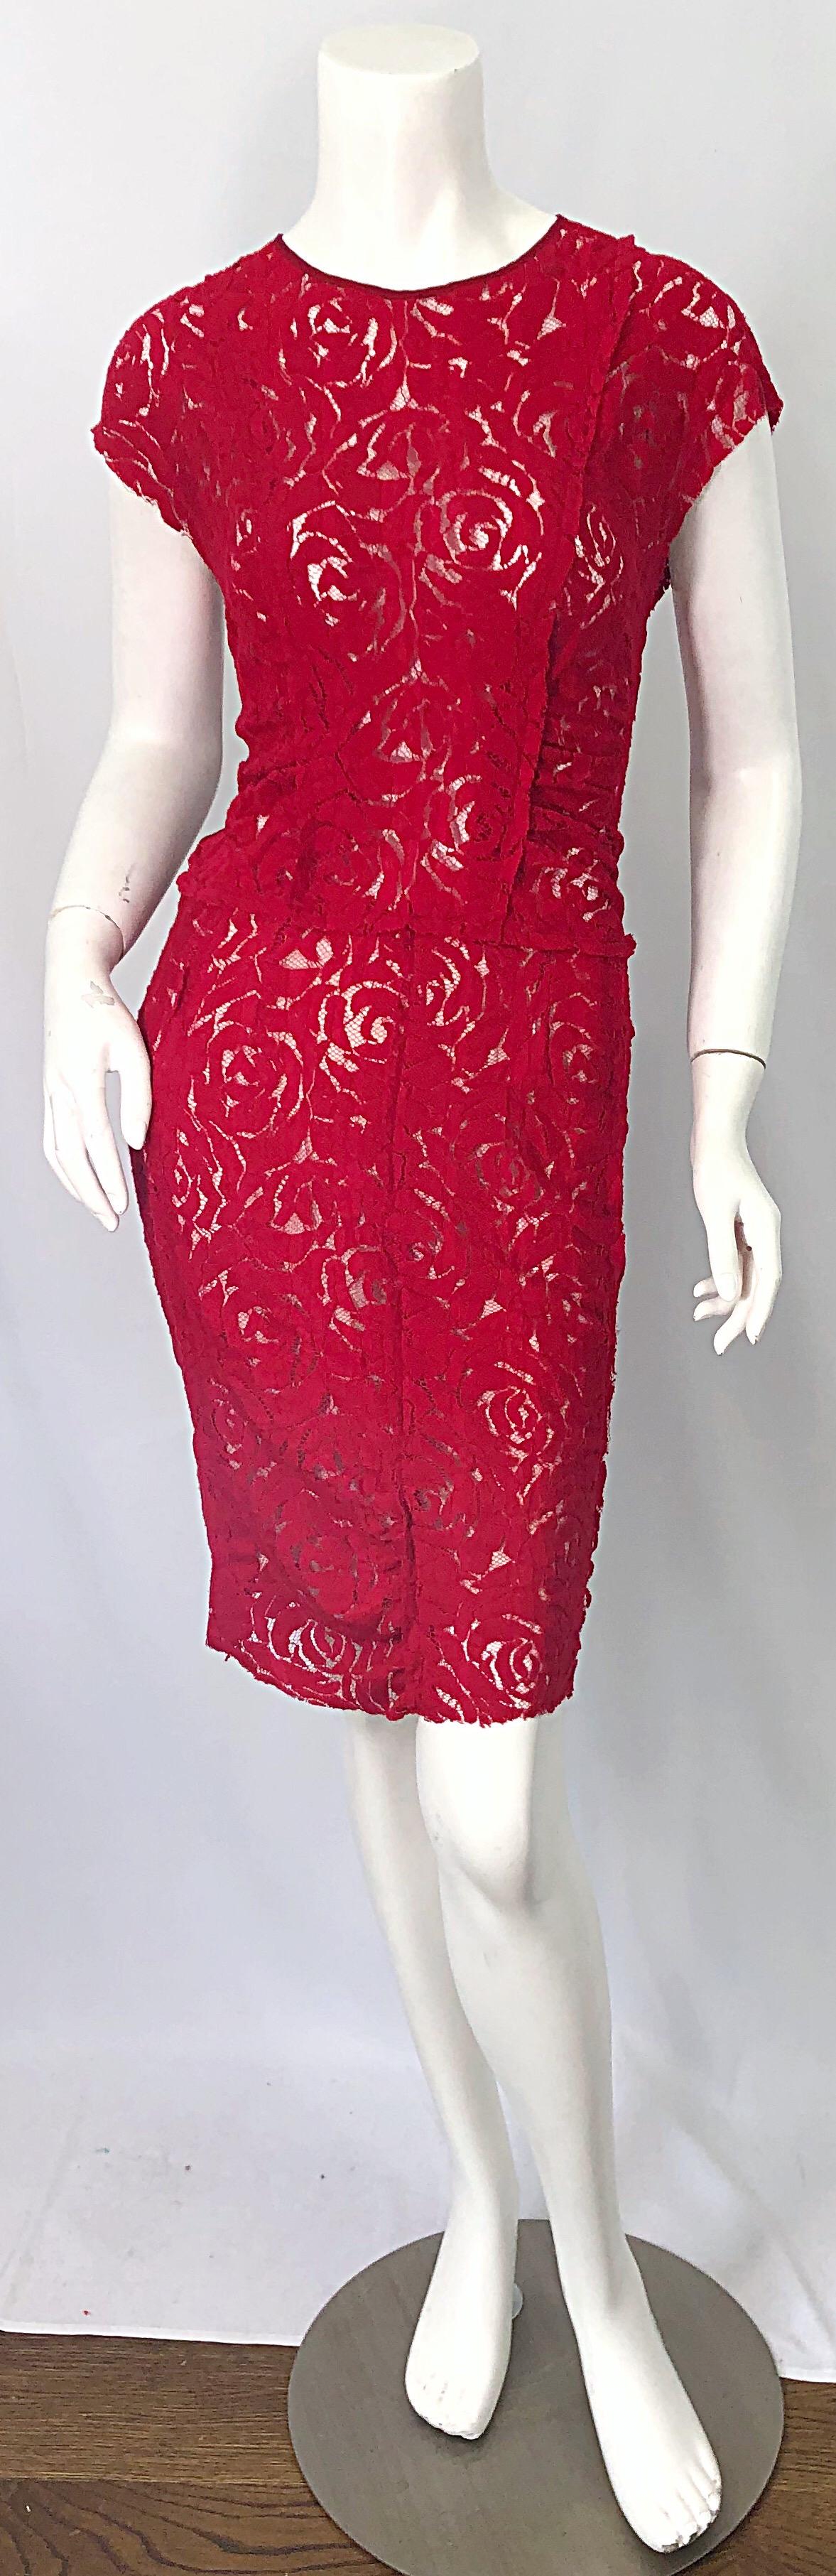 Beautiful early 2000s vintage NINA RICCI lipstick red lace dress! Features a semi sheer tailored bodice that stretches to fit. Short sleeves are perfect for any time of year. Knit panels at each side on the back. Hidden zipper up the back with